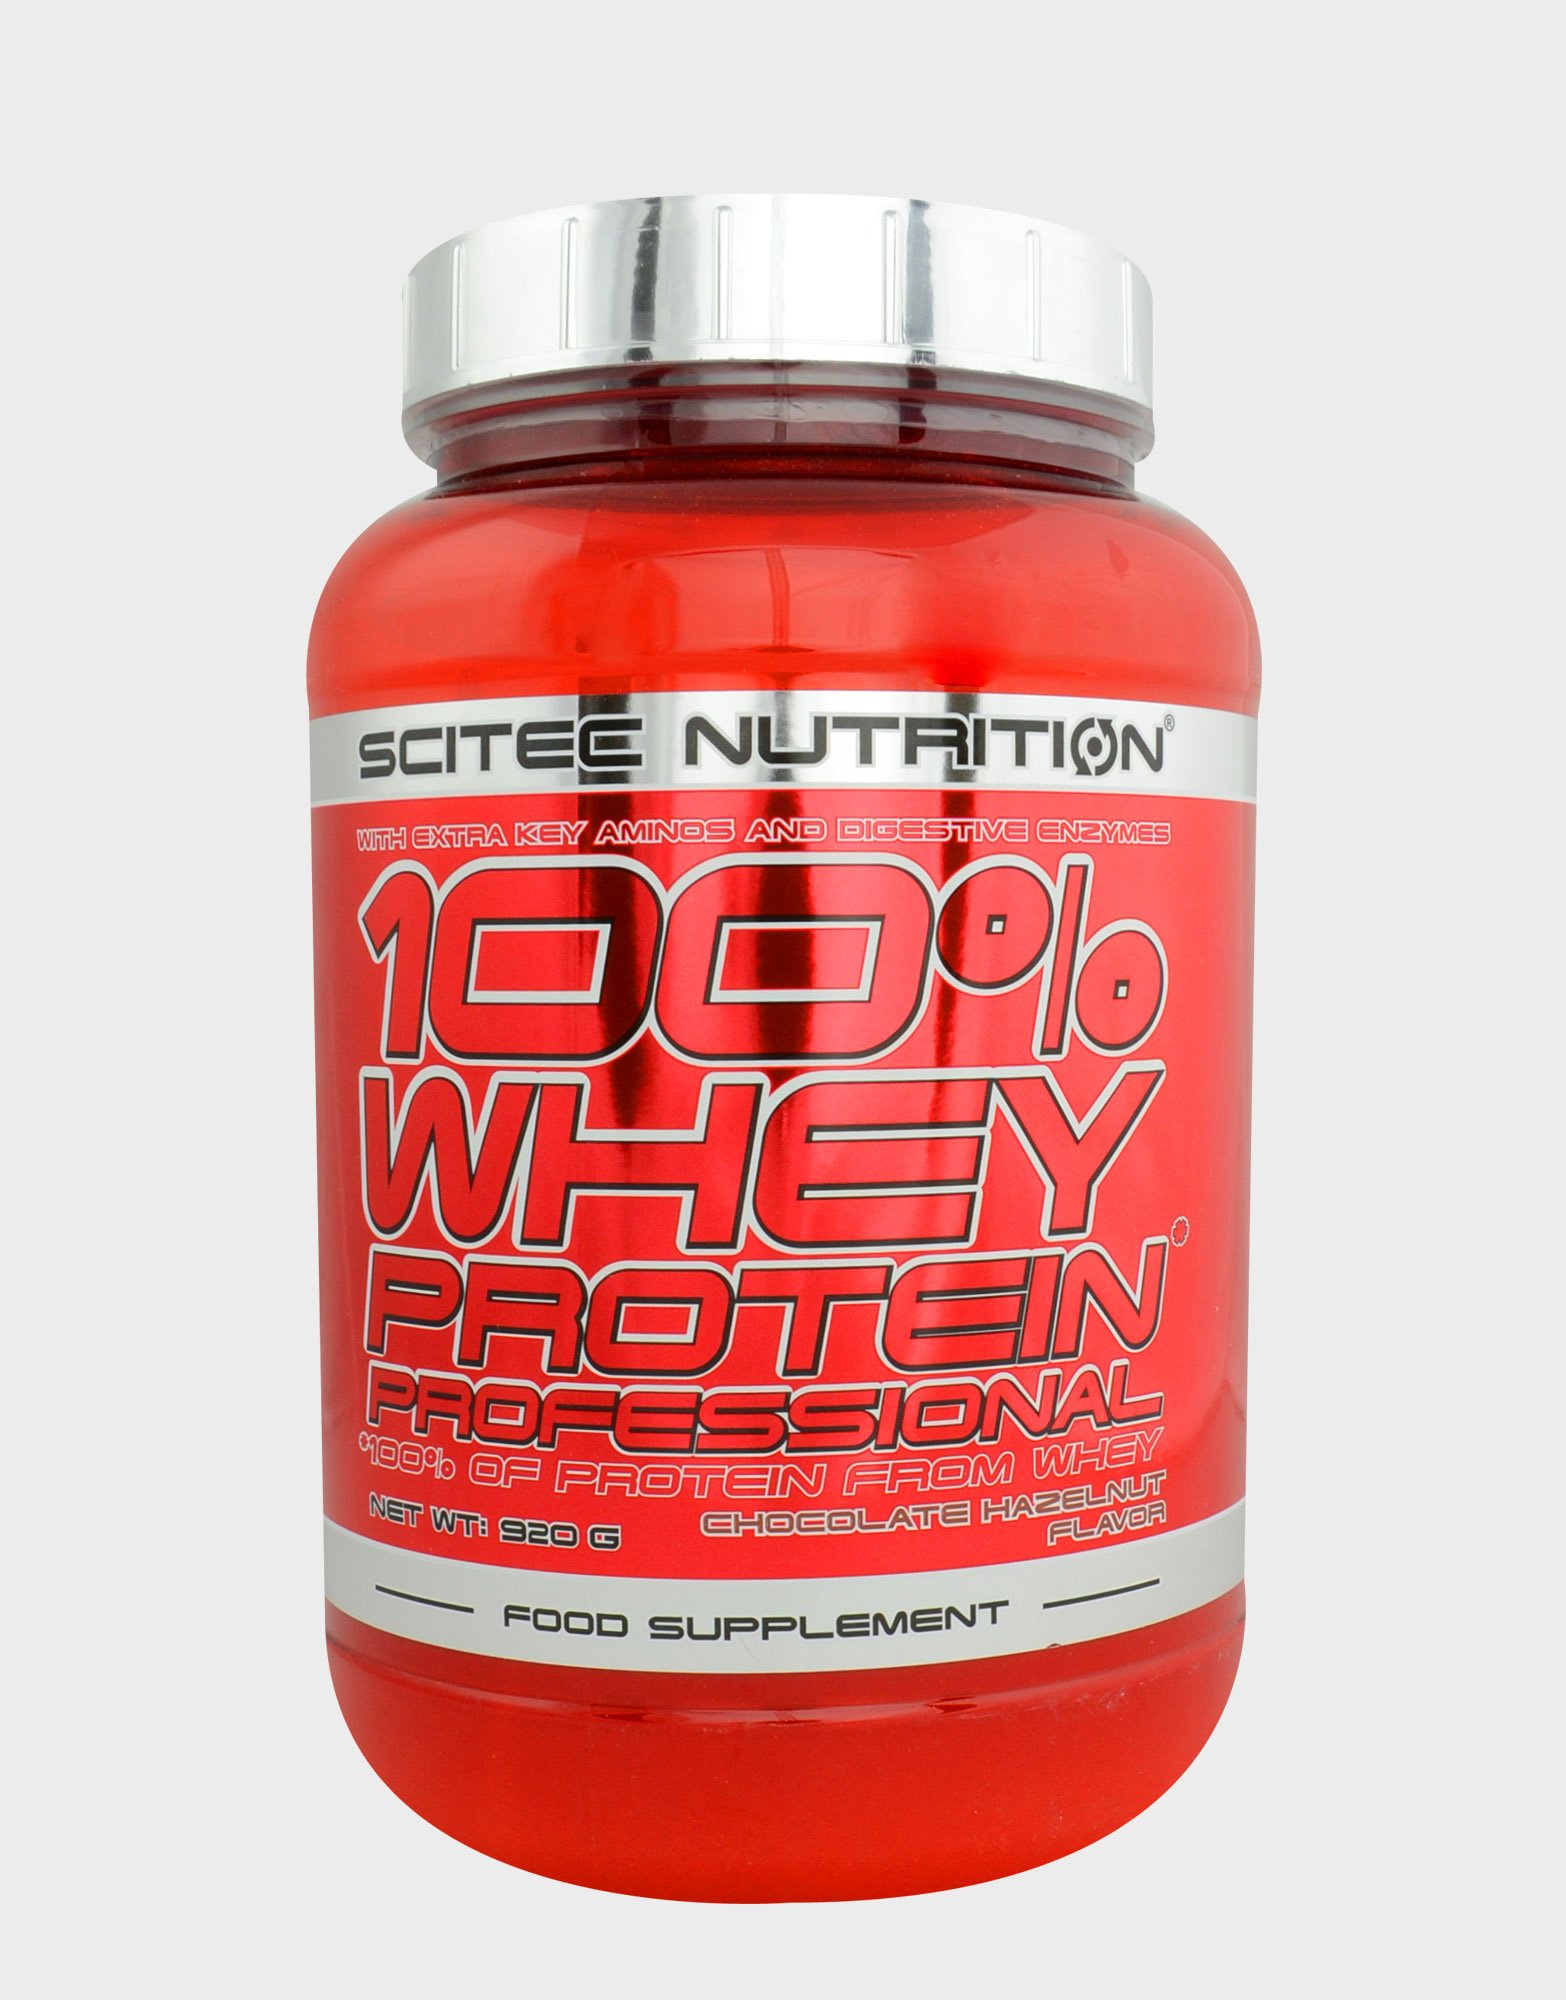 100% Whey Protein Professional LS, 920 g, Scitec Nutrition. Whey Concentrate. Mass Gain recovery Anti-catabolic properties 